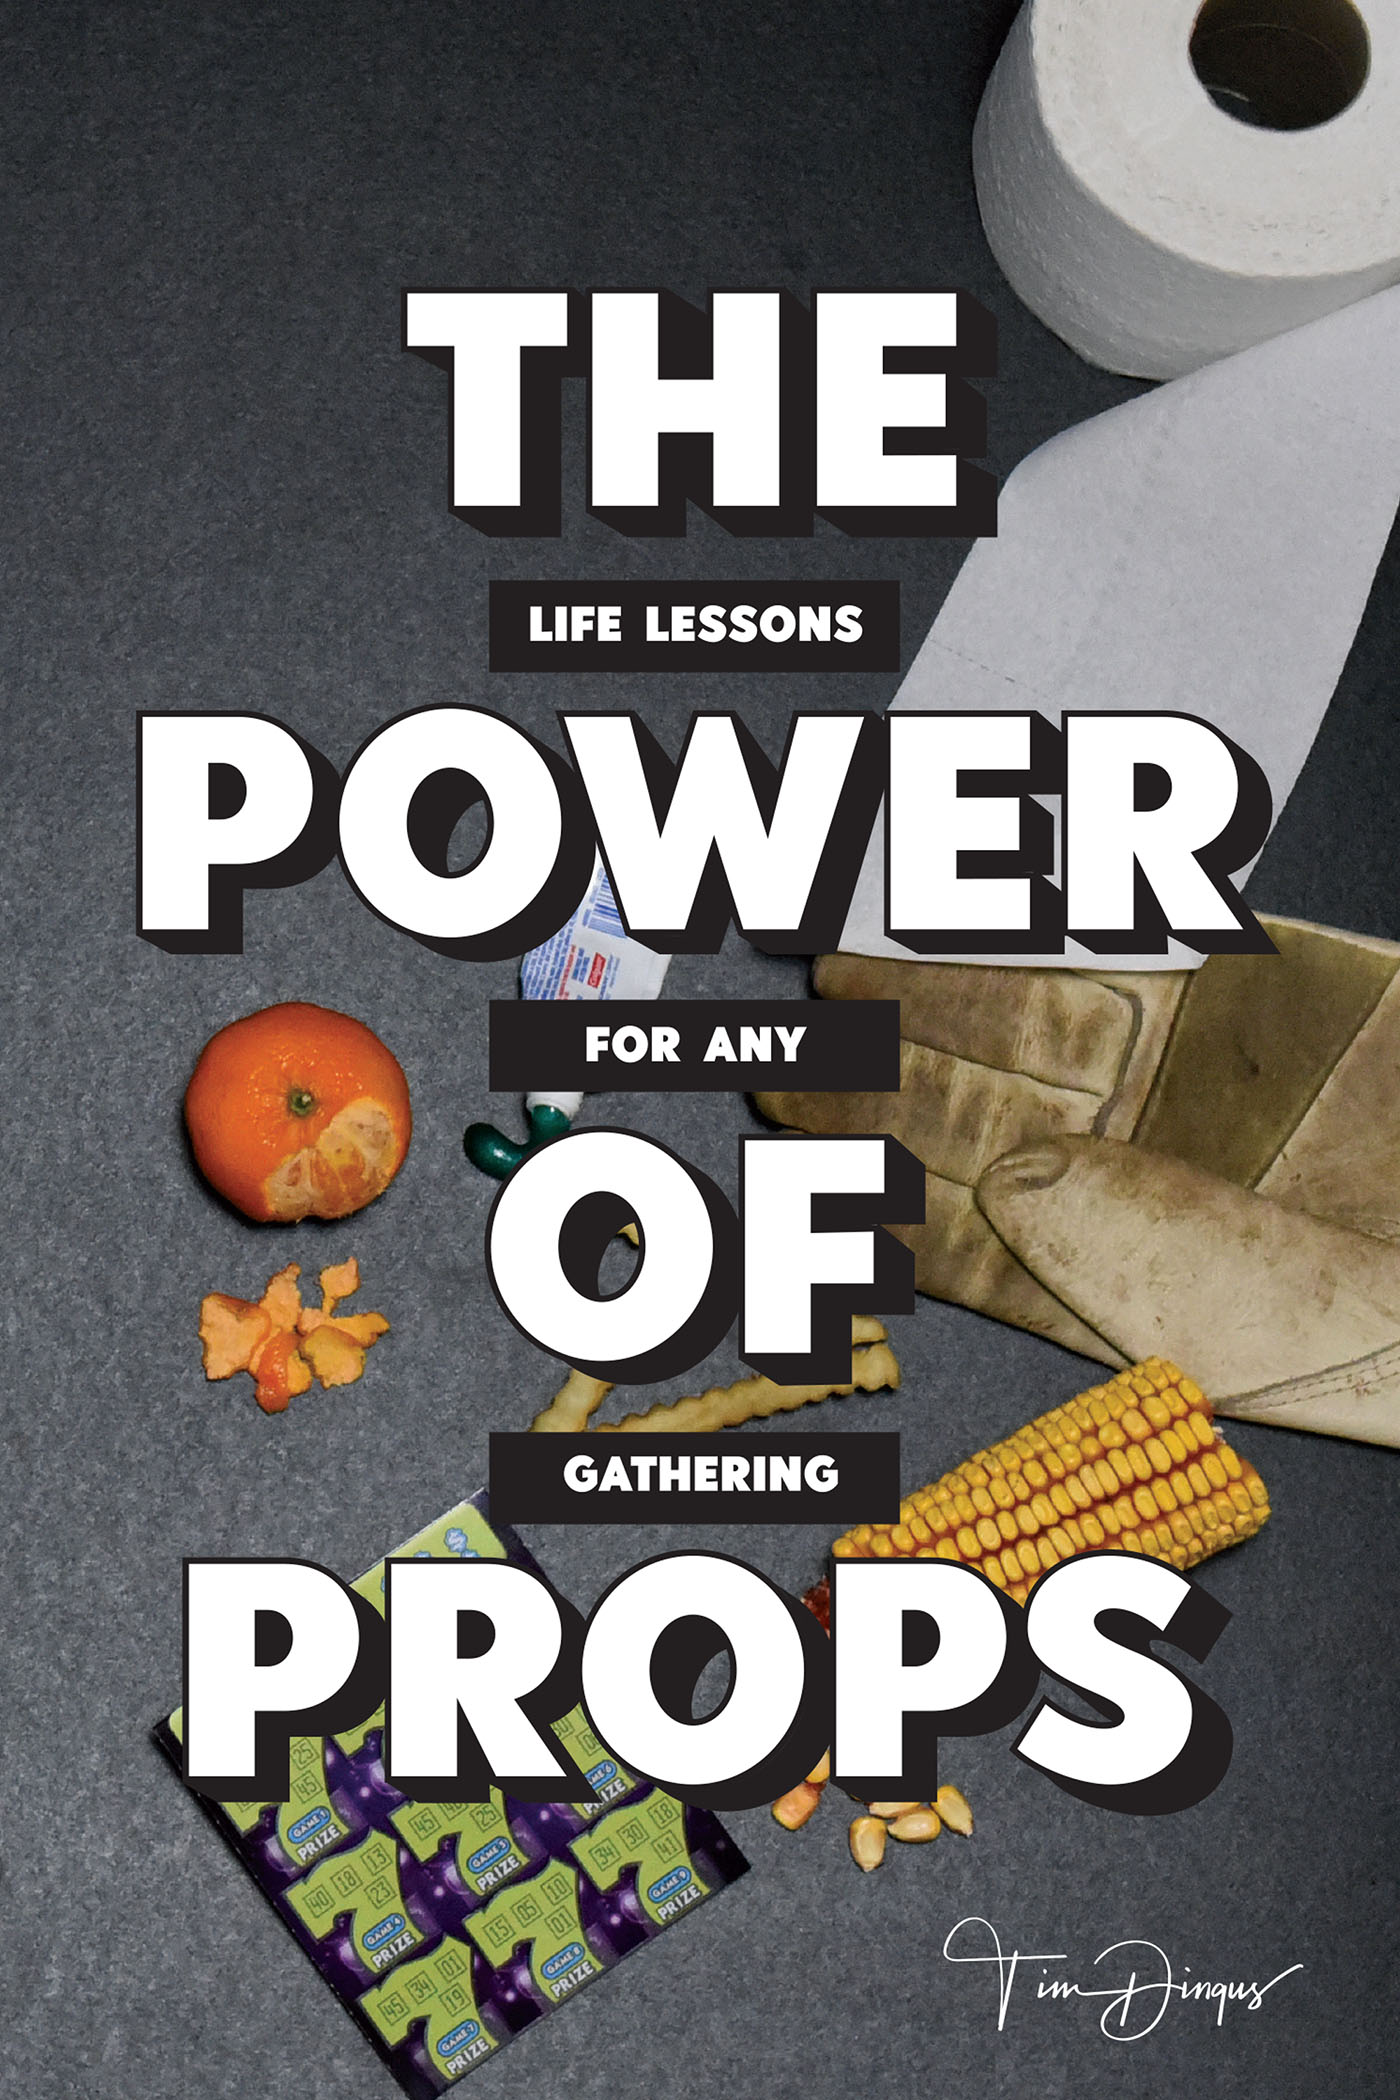 THE POWER OF PROPS Cover Image